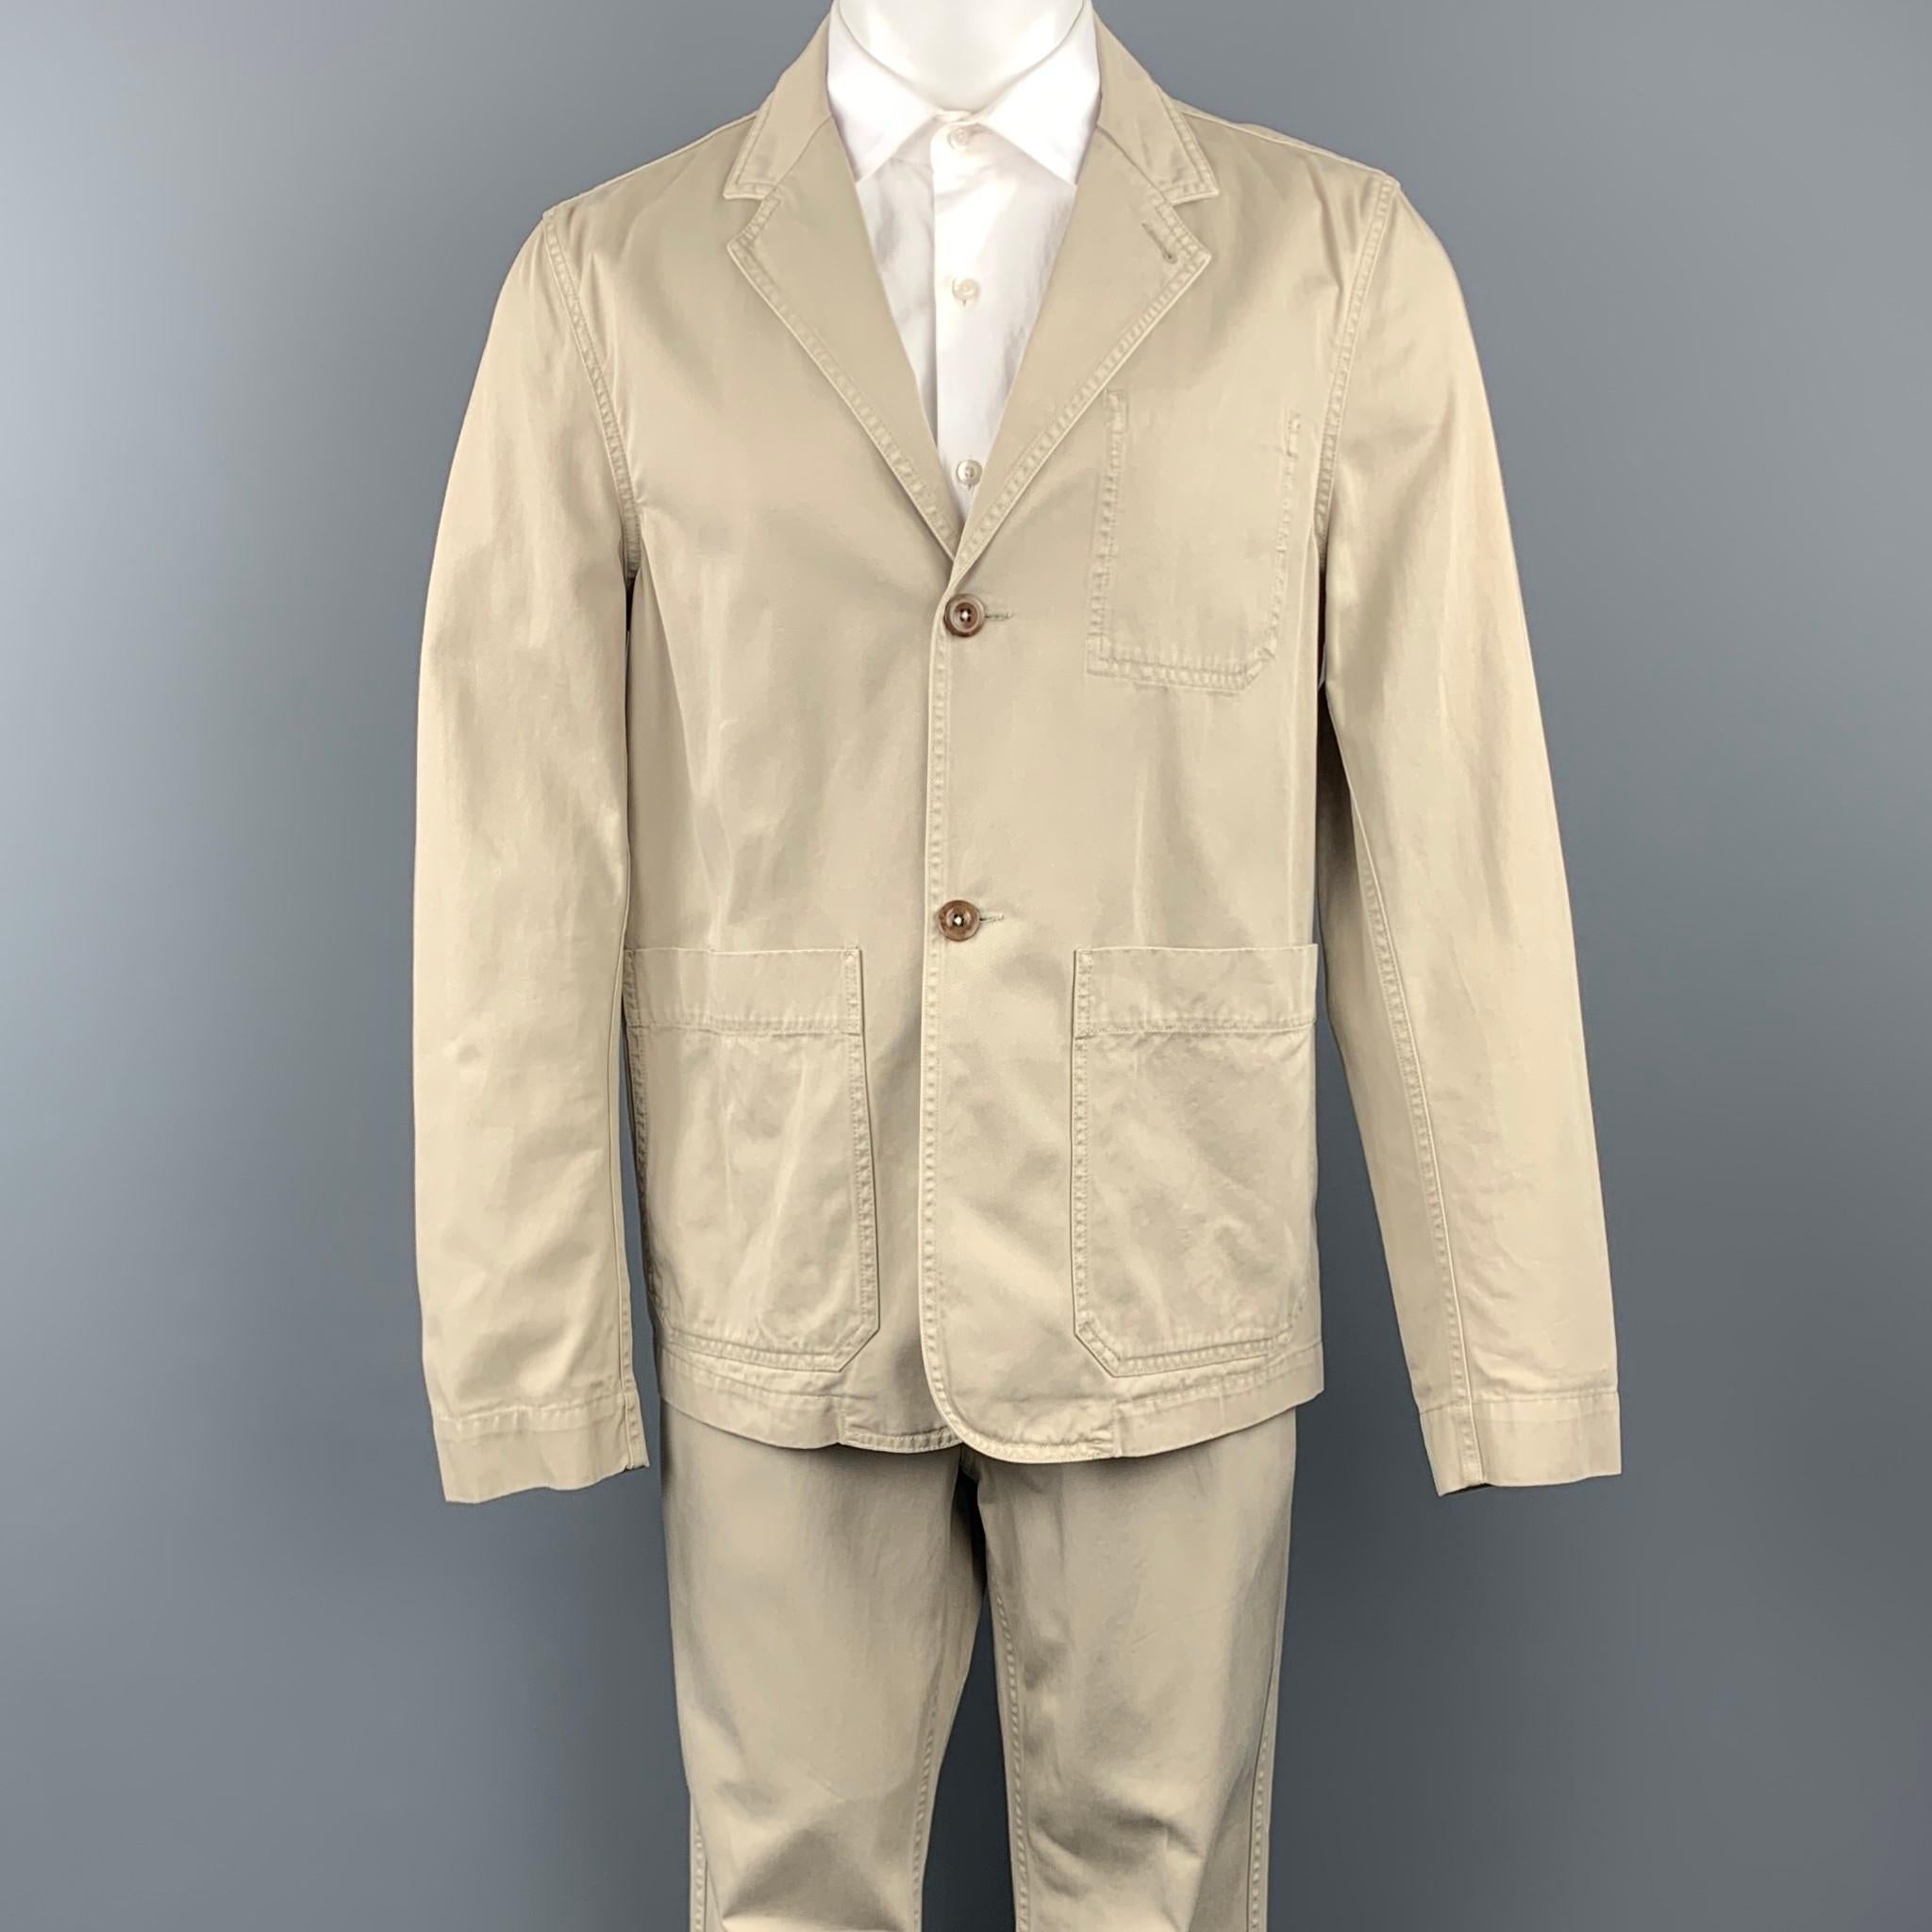 MARGARET HOWELL short suit comes in a khaki cotton and includes a single breasted, two button sport coat with a notch lapel and matching flat front trousers. 

Very Good Pre-Owned Condition.
Marked: M

Measurements:

-Jacket
Shoulder: 18.5 in.